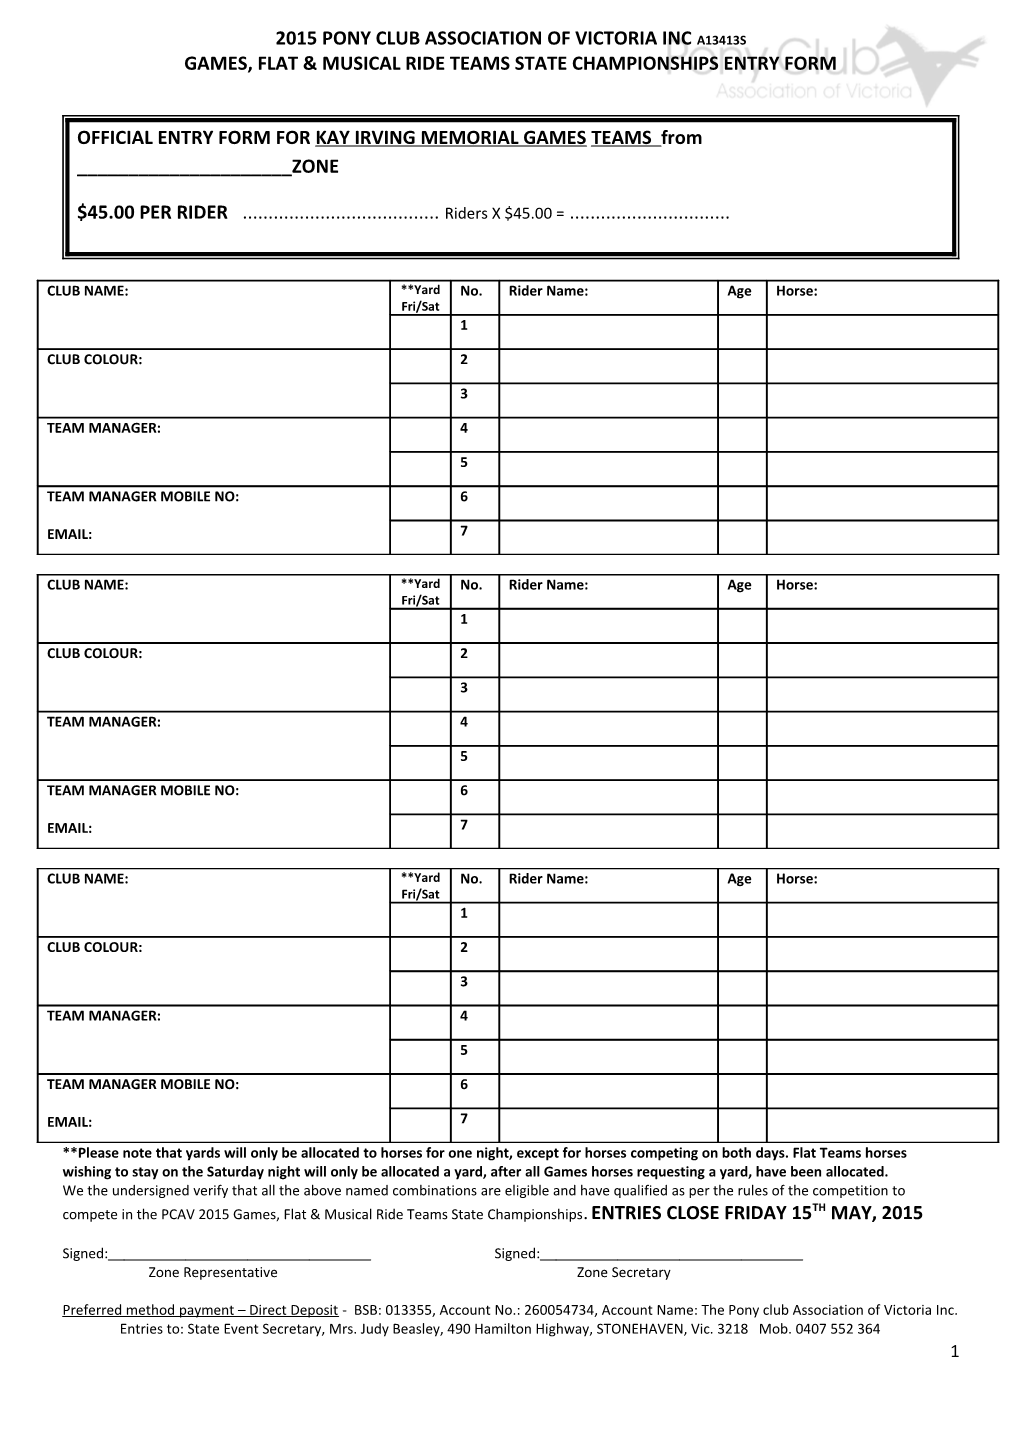 Games, Flat & Musical Ride Teams State Championships Entry Form